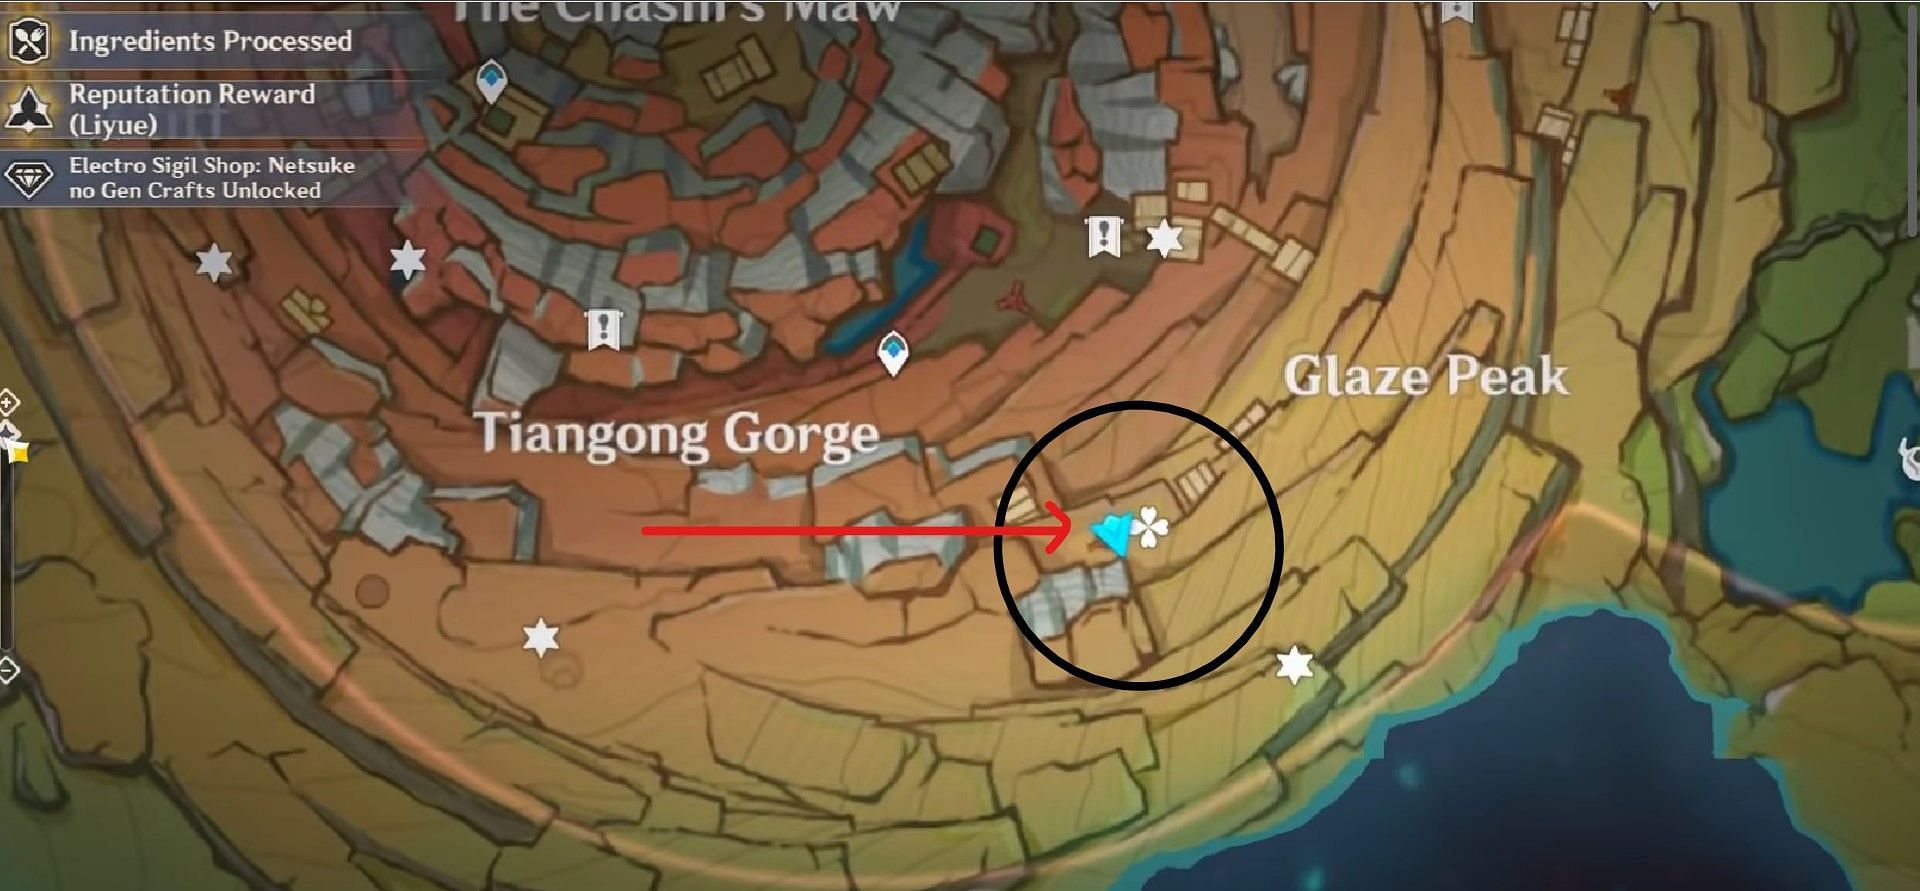 Location of the entrance of the gate in The Chasm: Underground Mines (Image via HoYoverse)